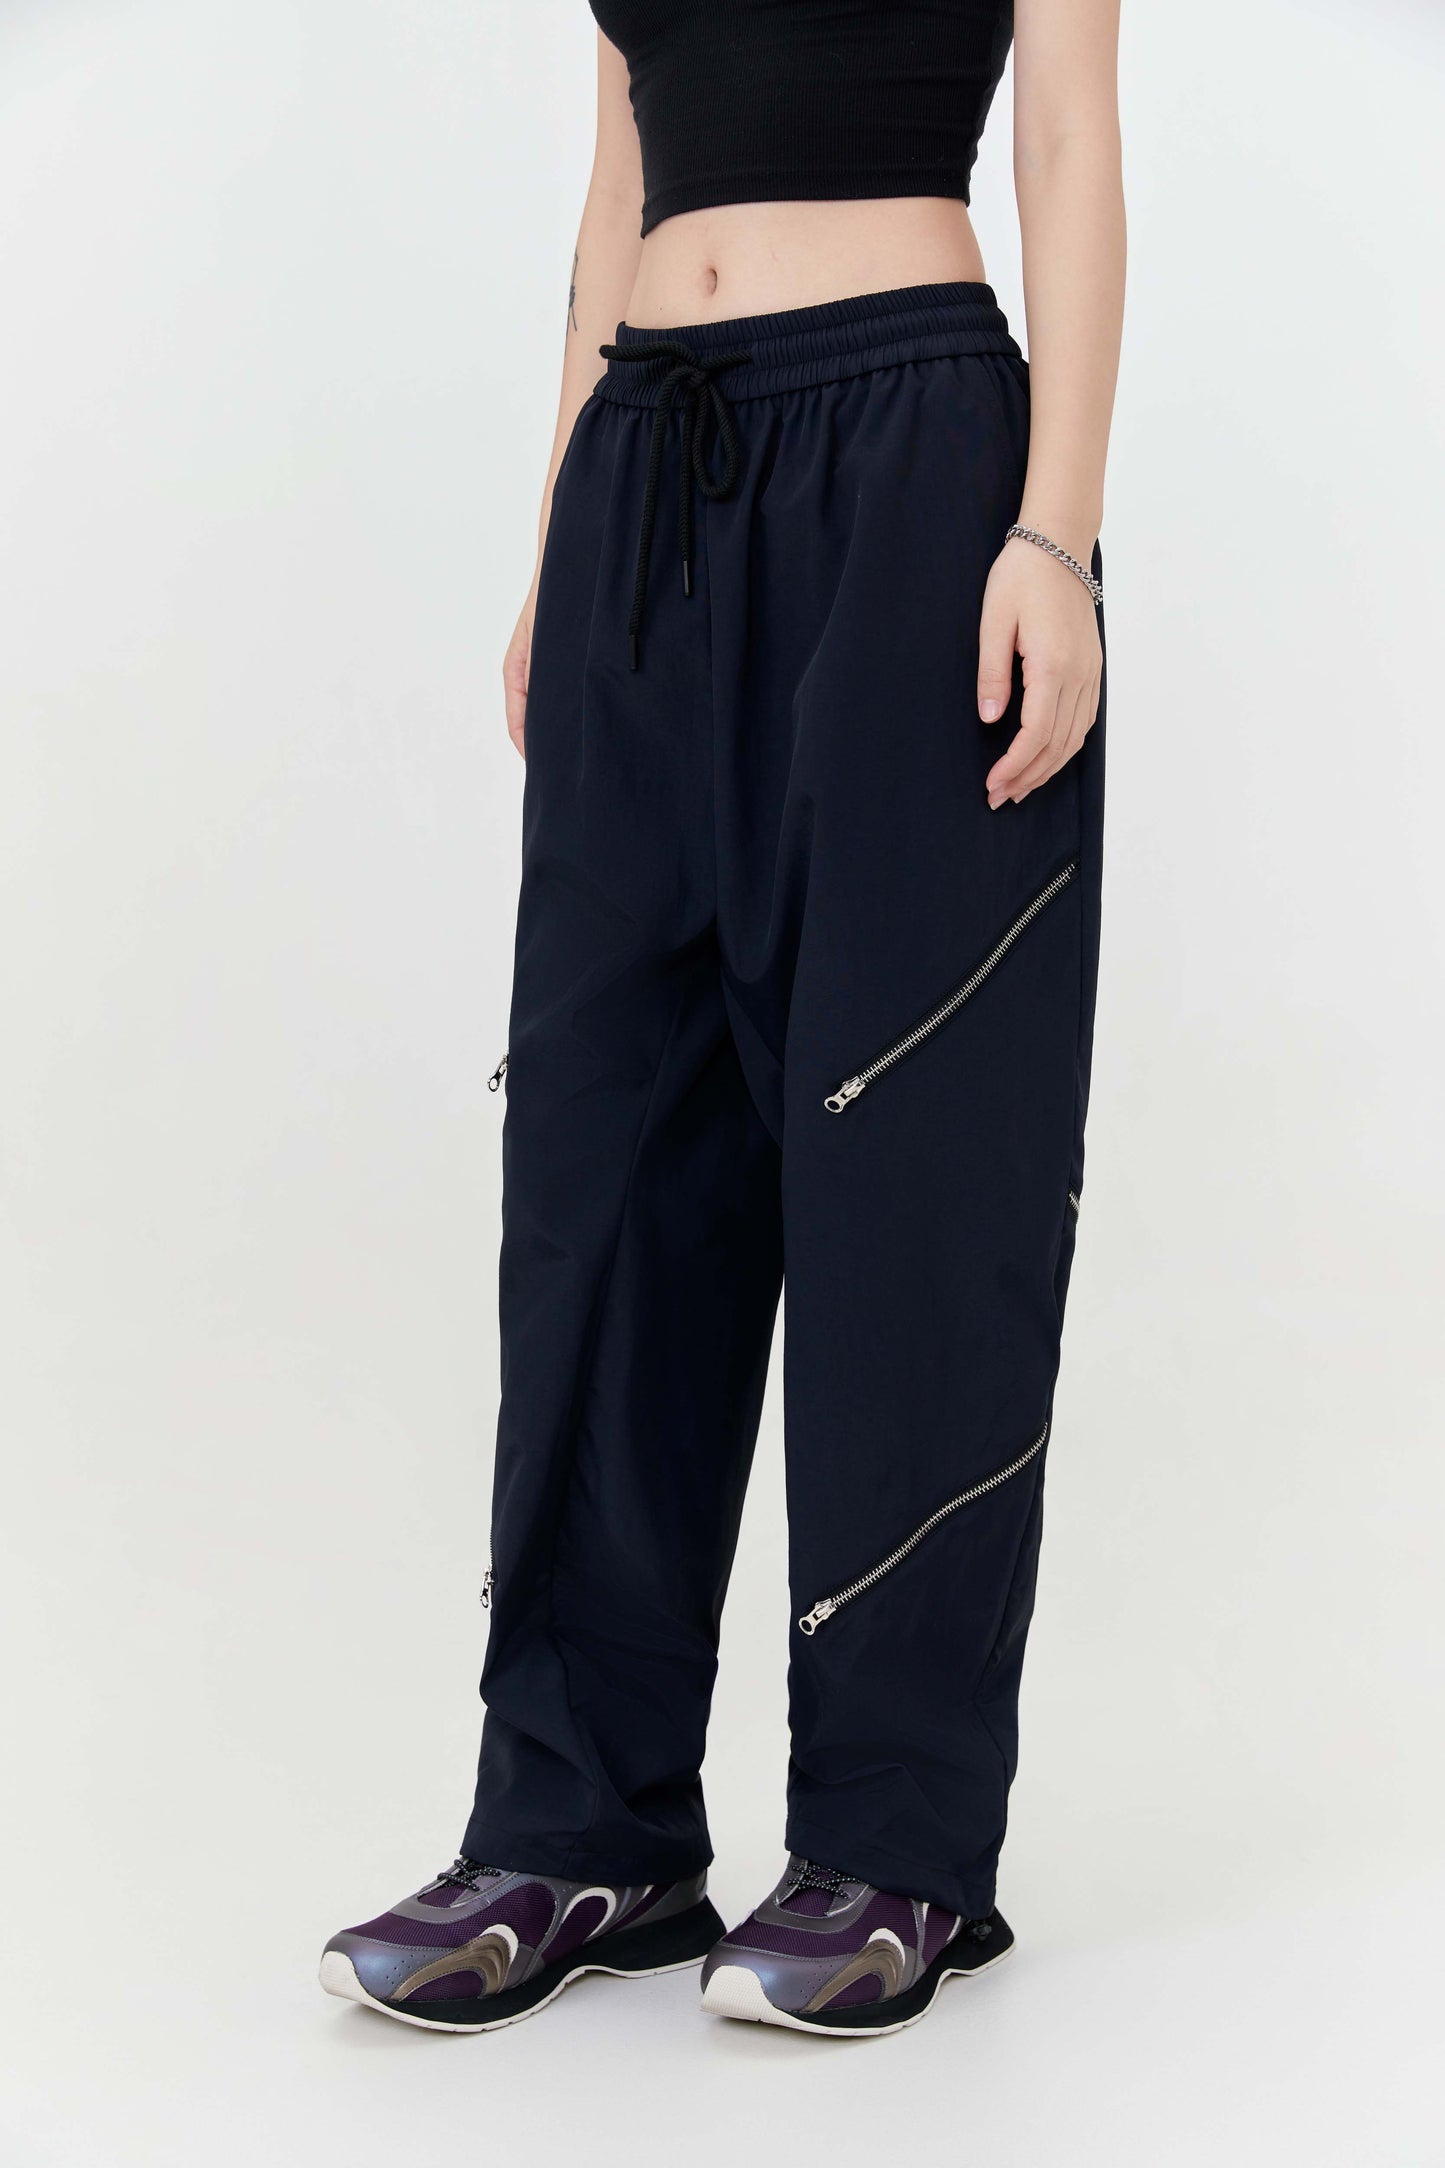 TWO LINES PANTS